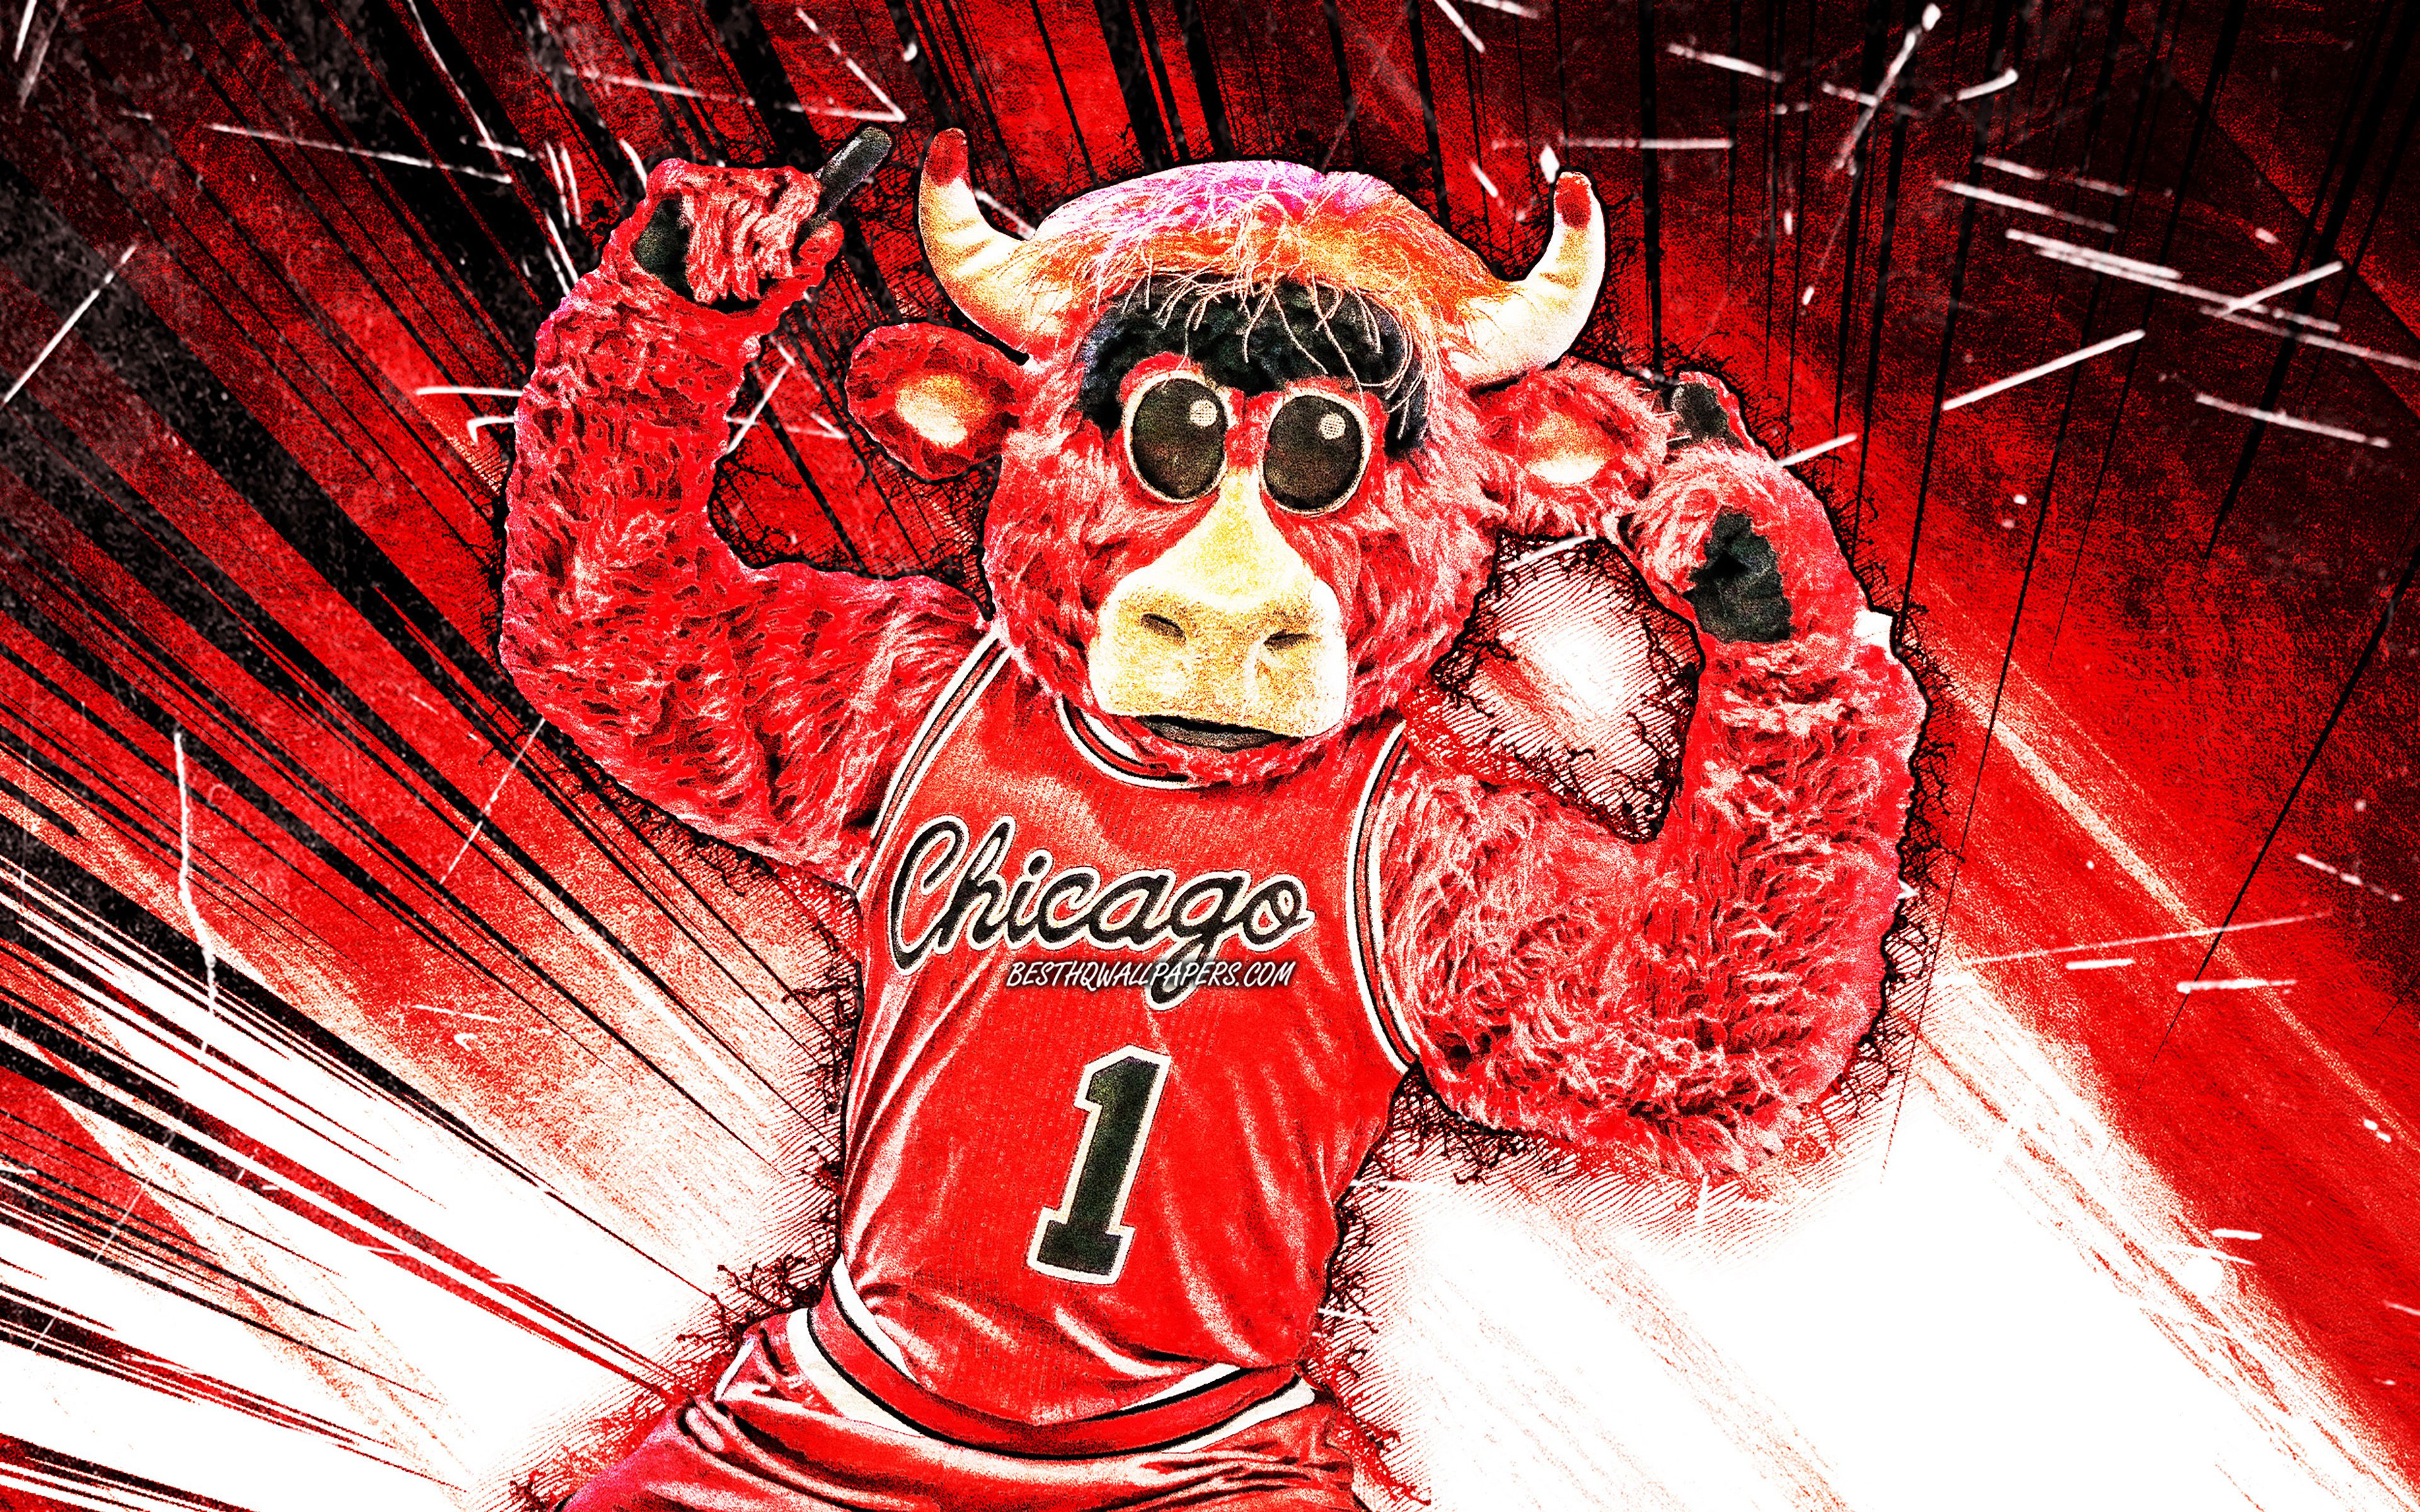 Download wallpaper 4k, Benny the Bull, grunge art, mascot, Chicago Bulls, red abstract rays, NBA, creative, USA, Chicago Bulls mascot, Benny, NBA mascots, official mascot, Benny mascot for desktop with resolution 3840x2400